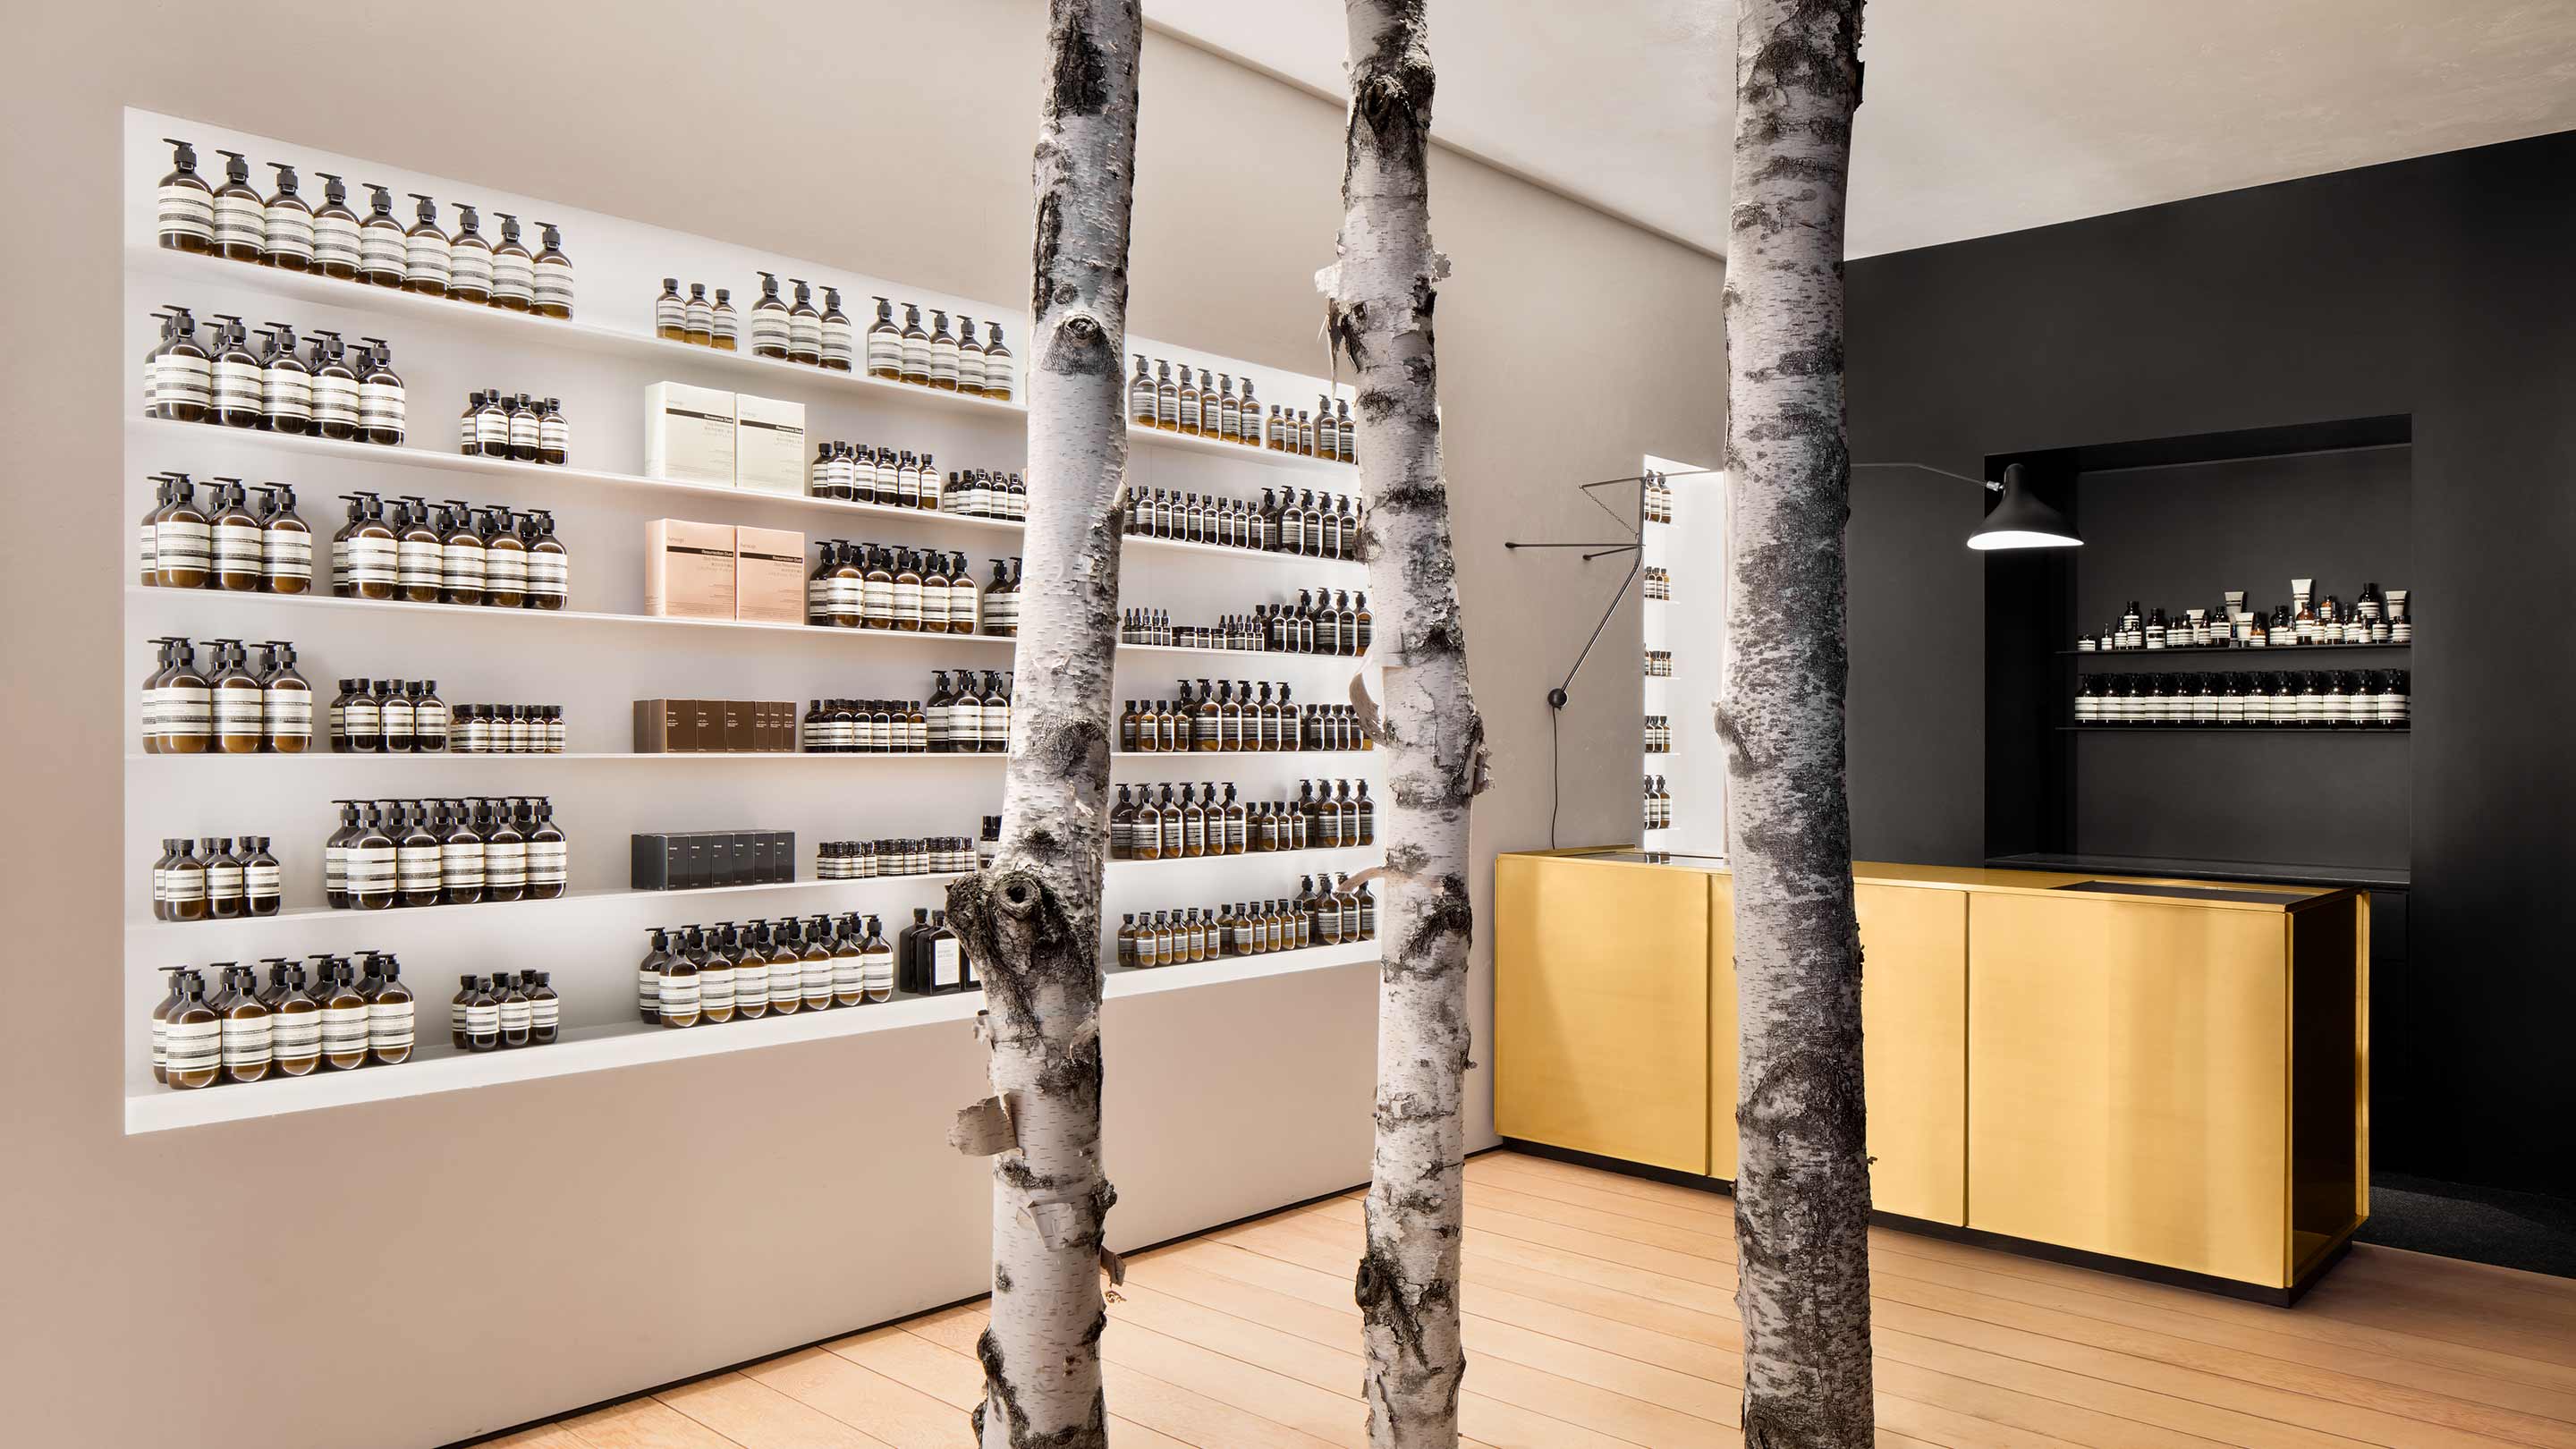 Three tall tree trunks acting as supporting beams within a modernist an Aesop store interior; fitted with brass counters and sinks against ice-black walls.